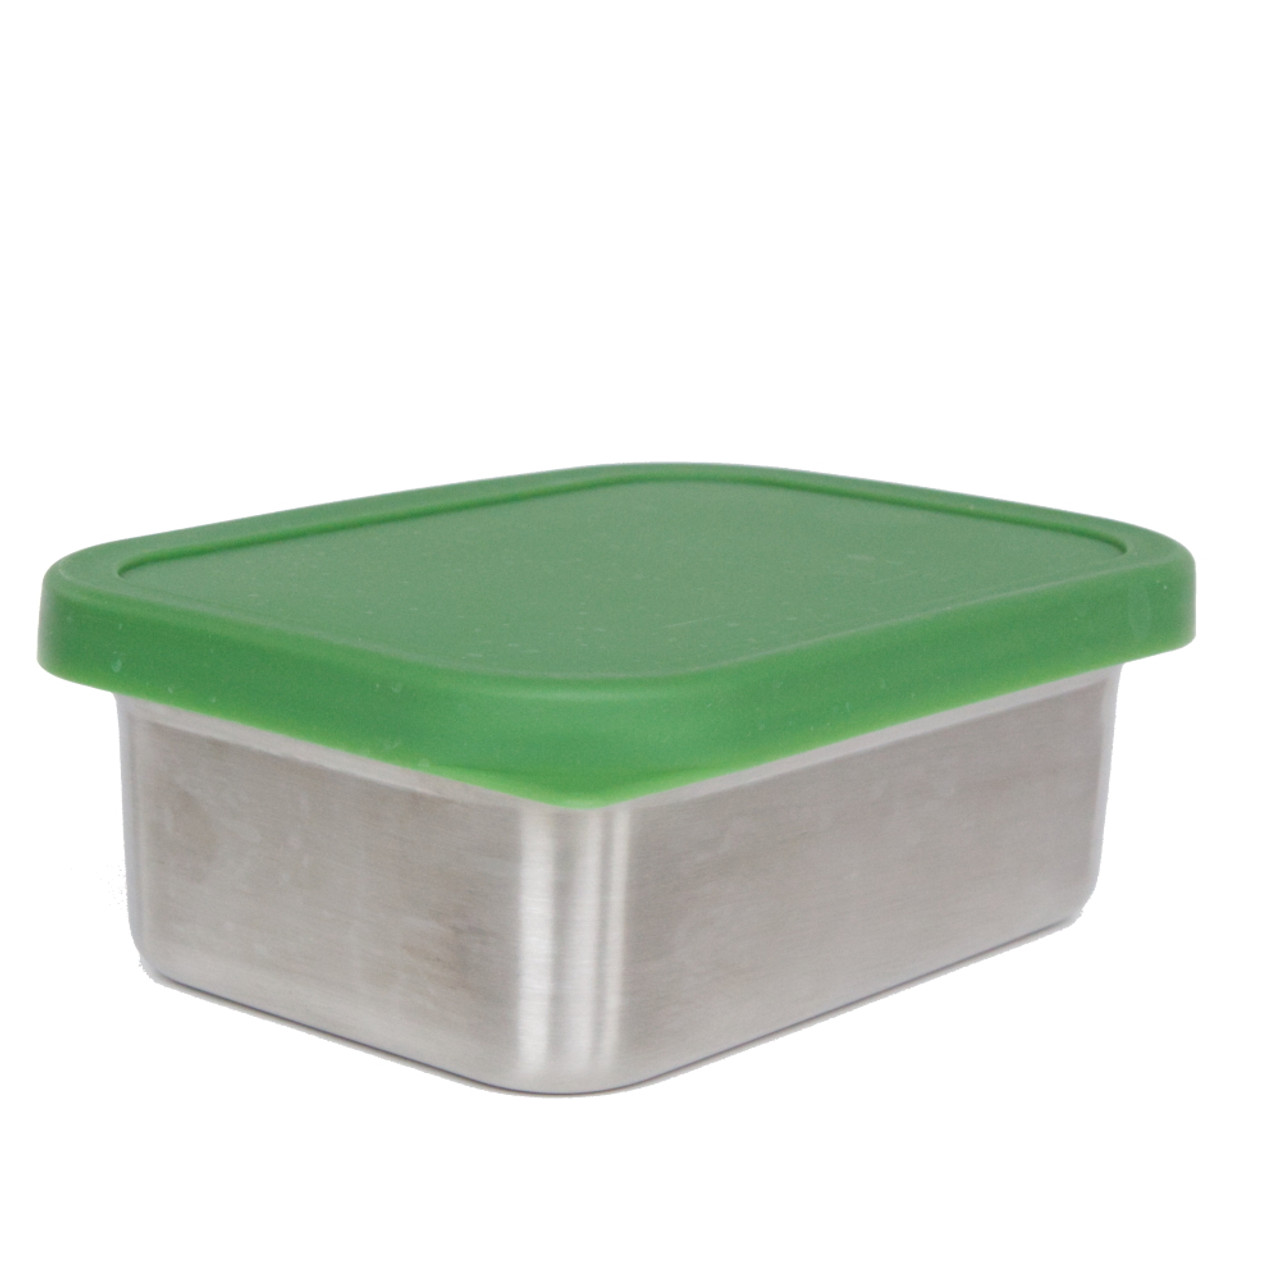 Life Without Waste Stainless Steel Container with Silicone Lid